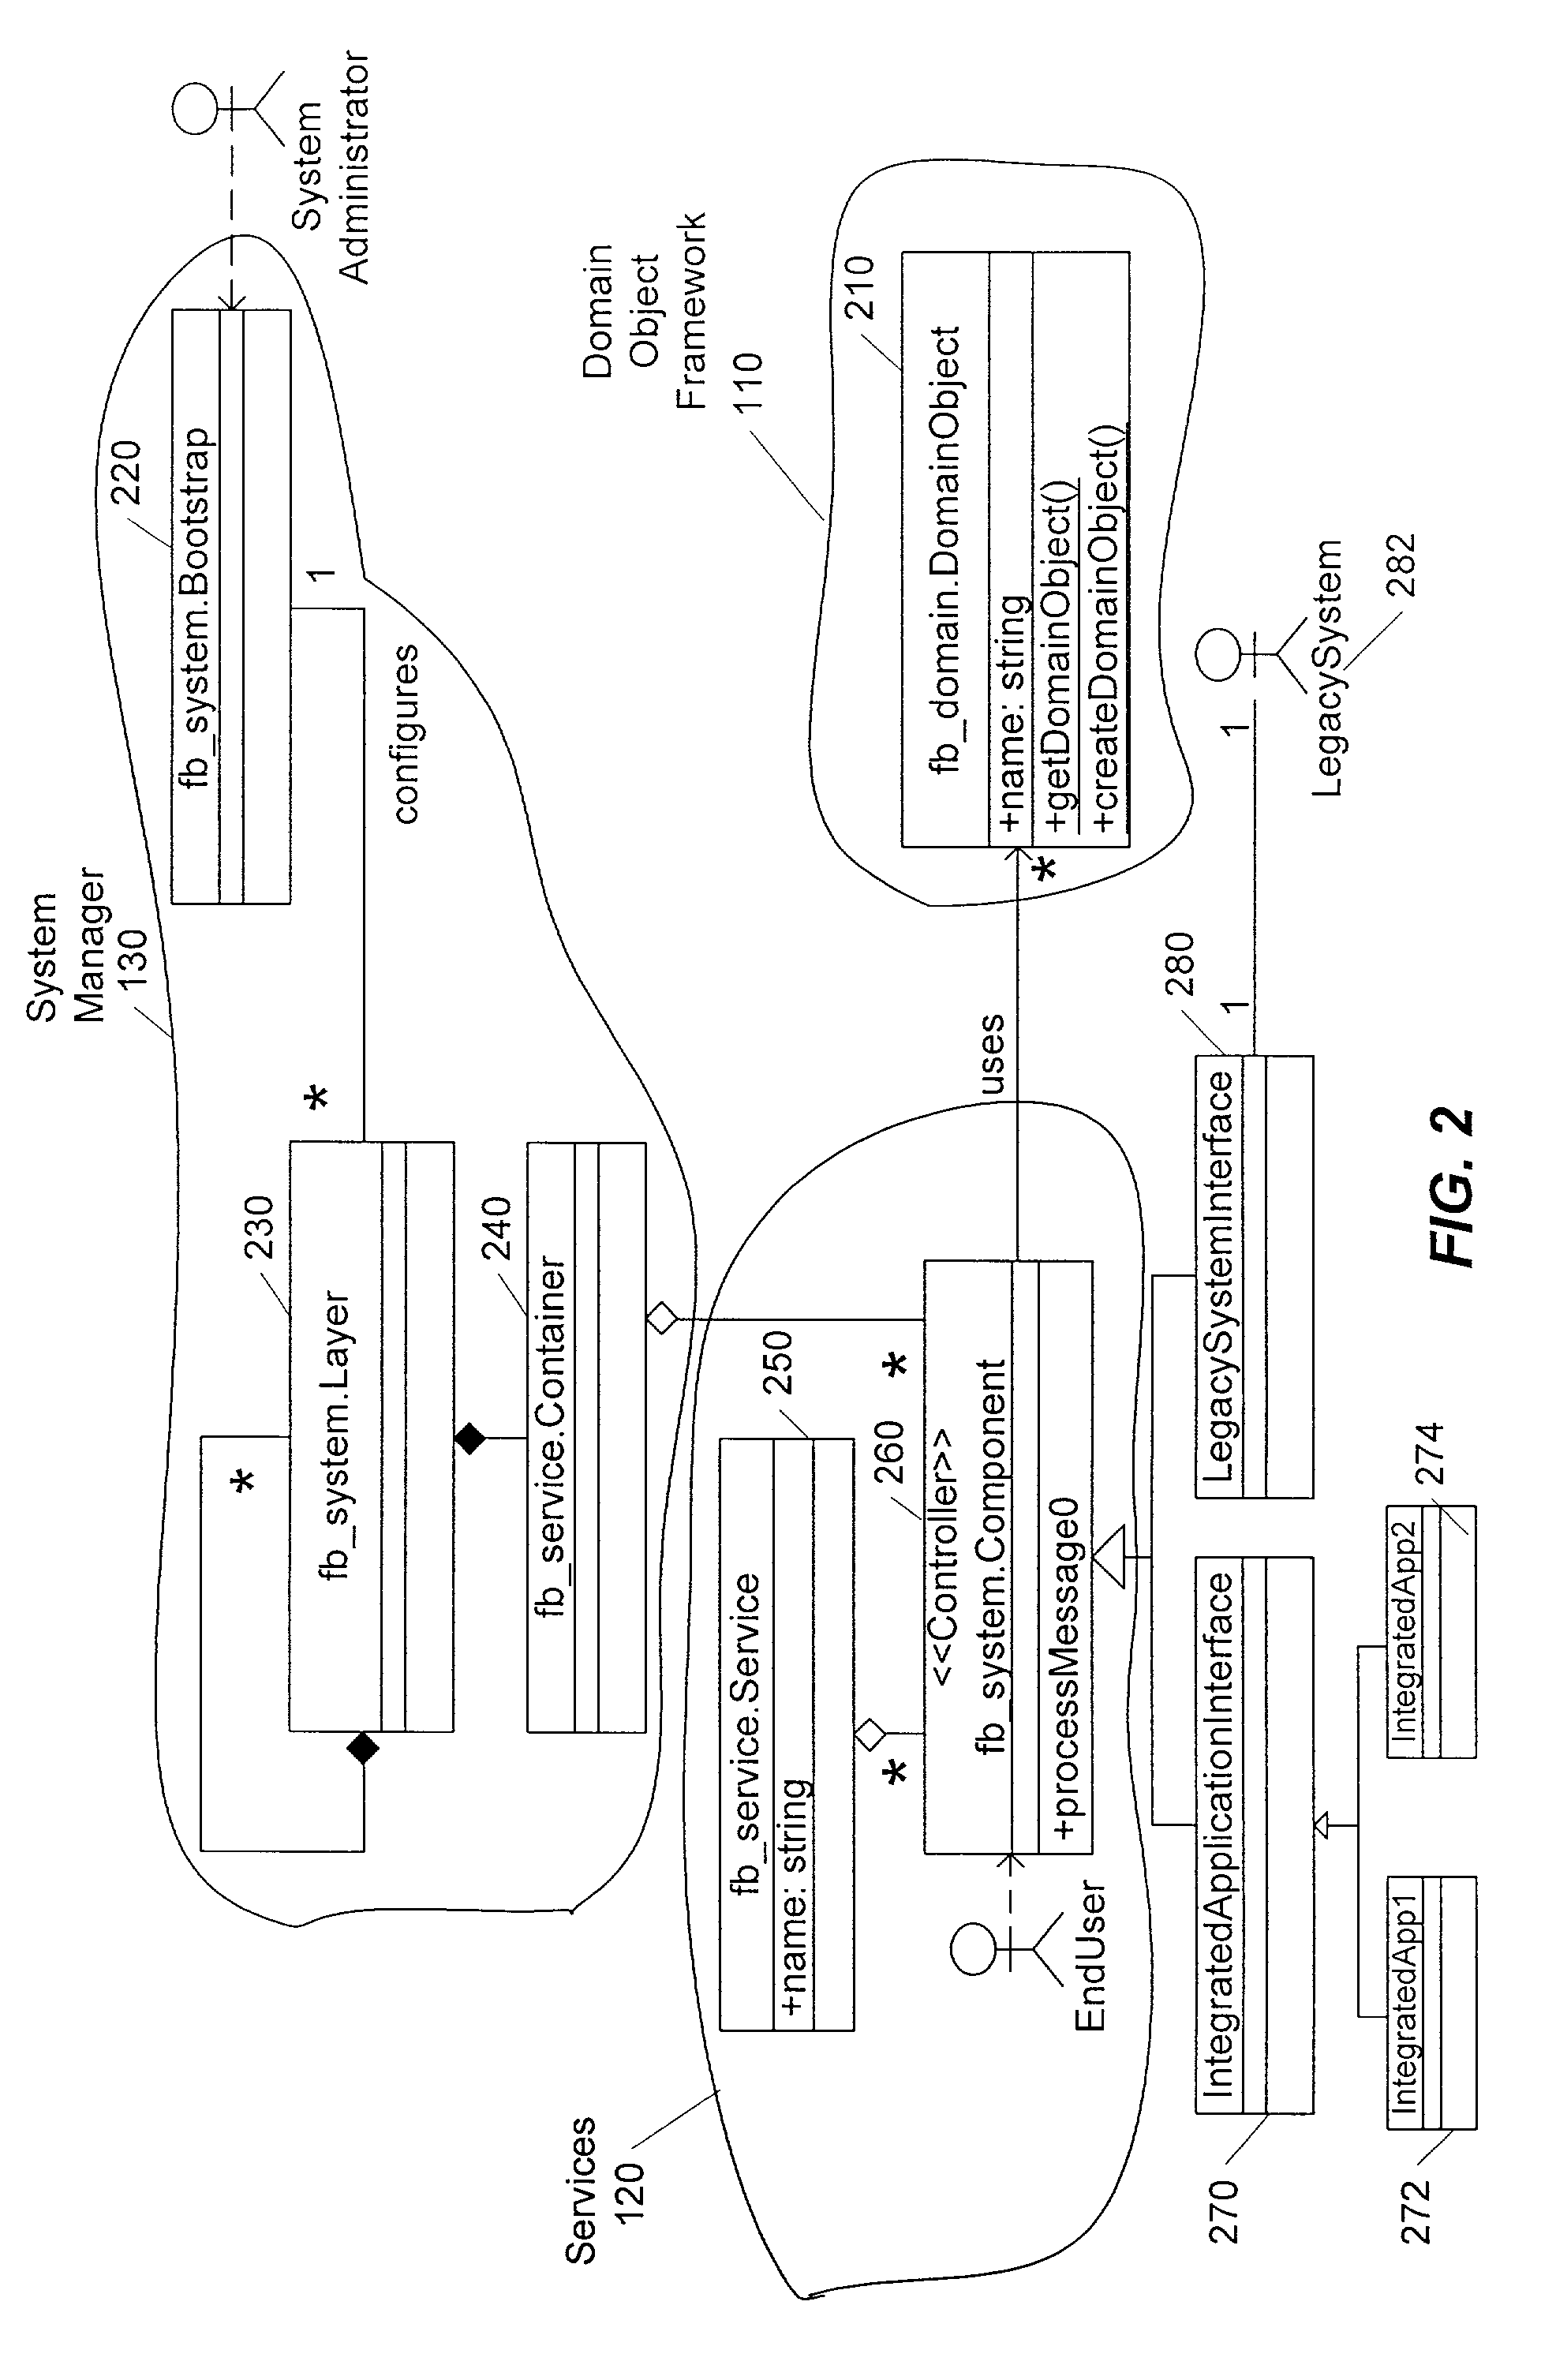 System for integrating data between a plurality of software applications in a factory environment